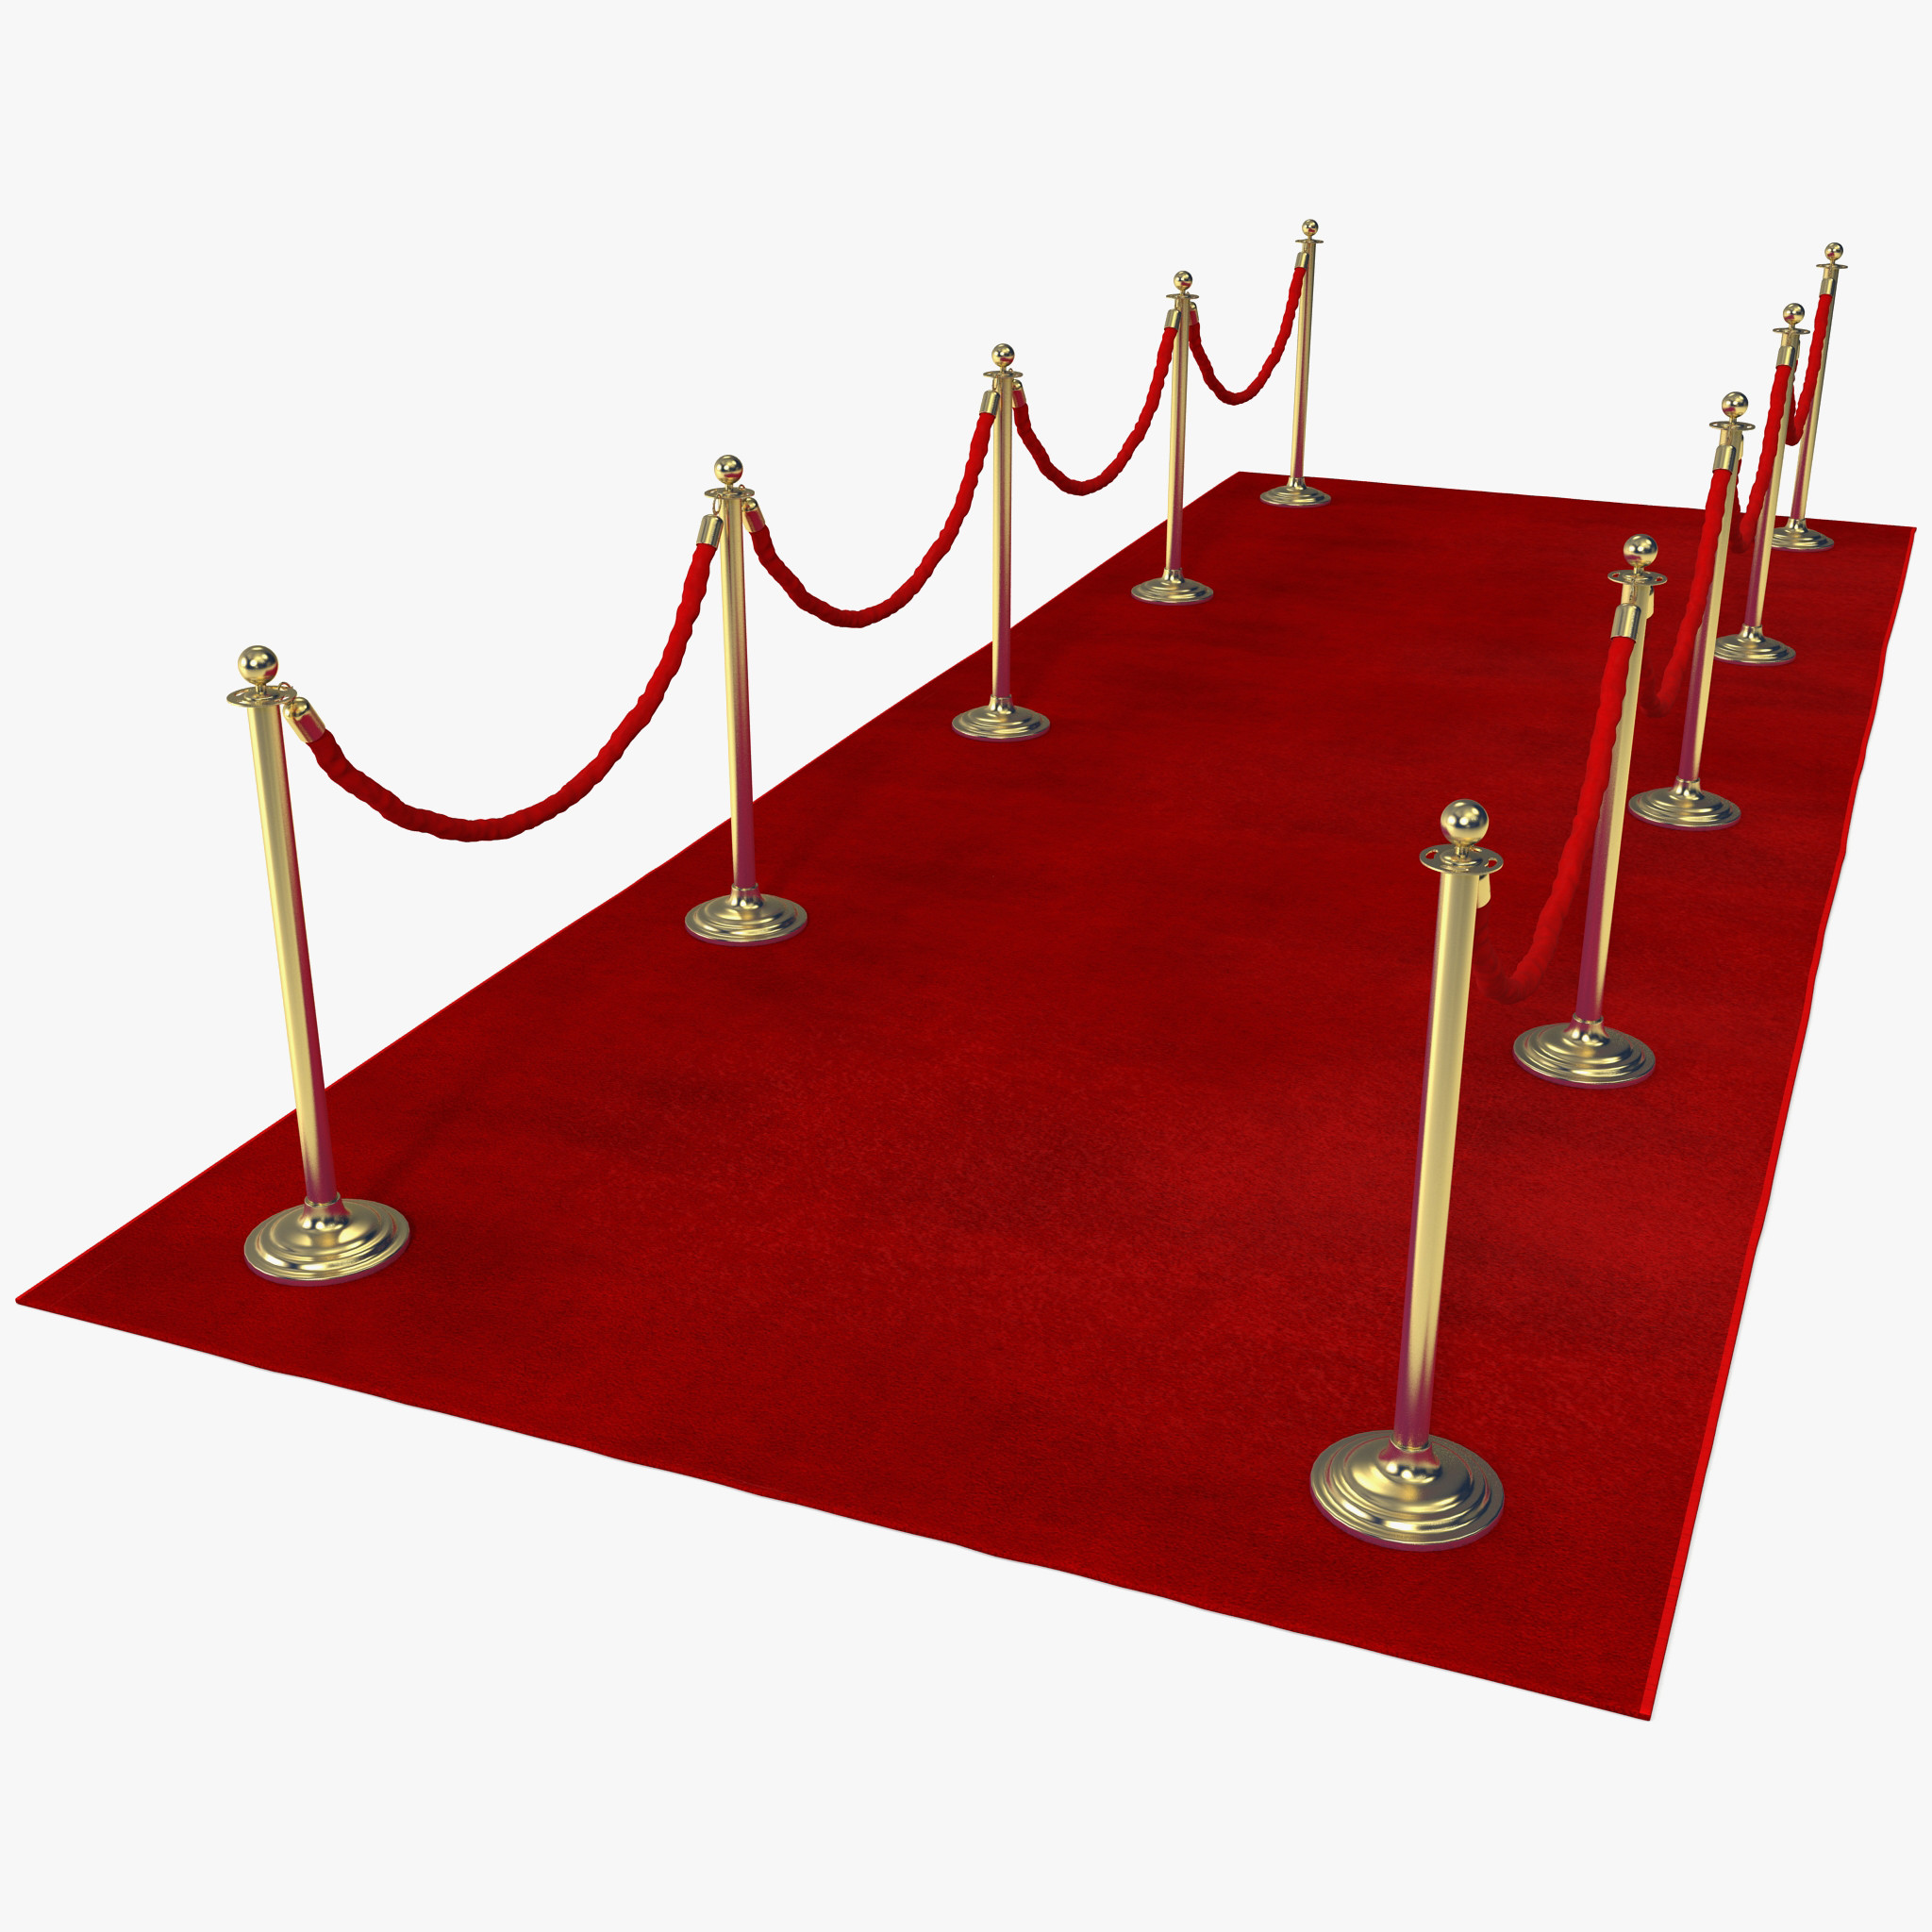 https://www.freeiconspng.com/uploads/simple-red-carpet-png-15.jpg